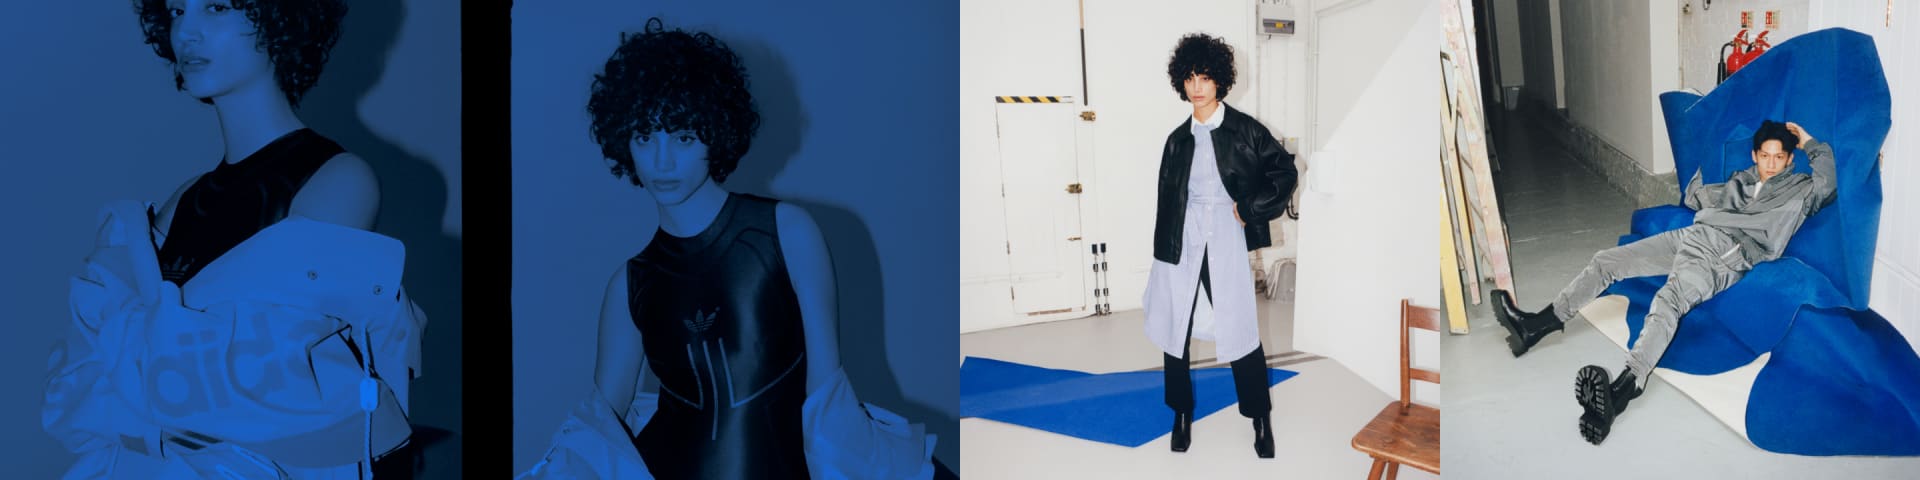 Four images of models sporting garments from the new Blue Version collection including a long shirt, a skin-tight neoprene, and a tracksuit.